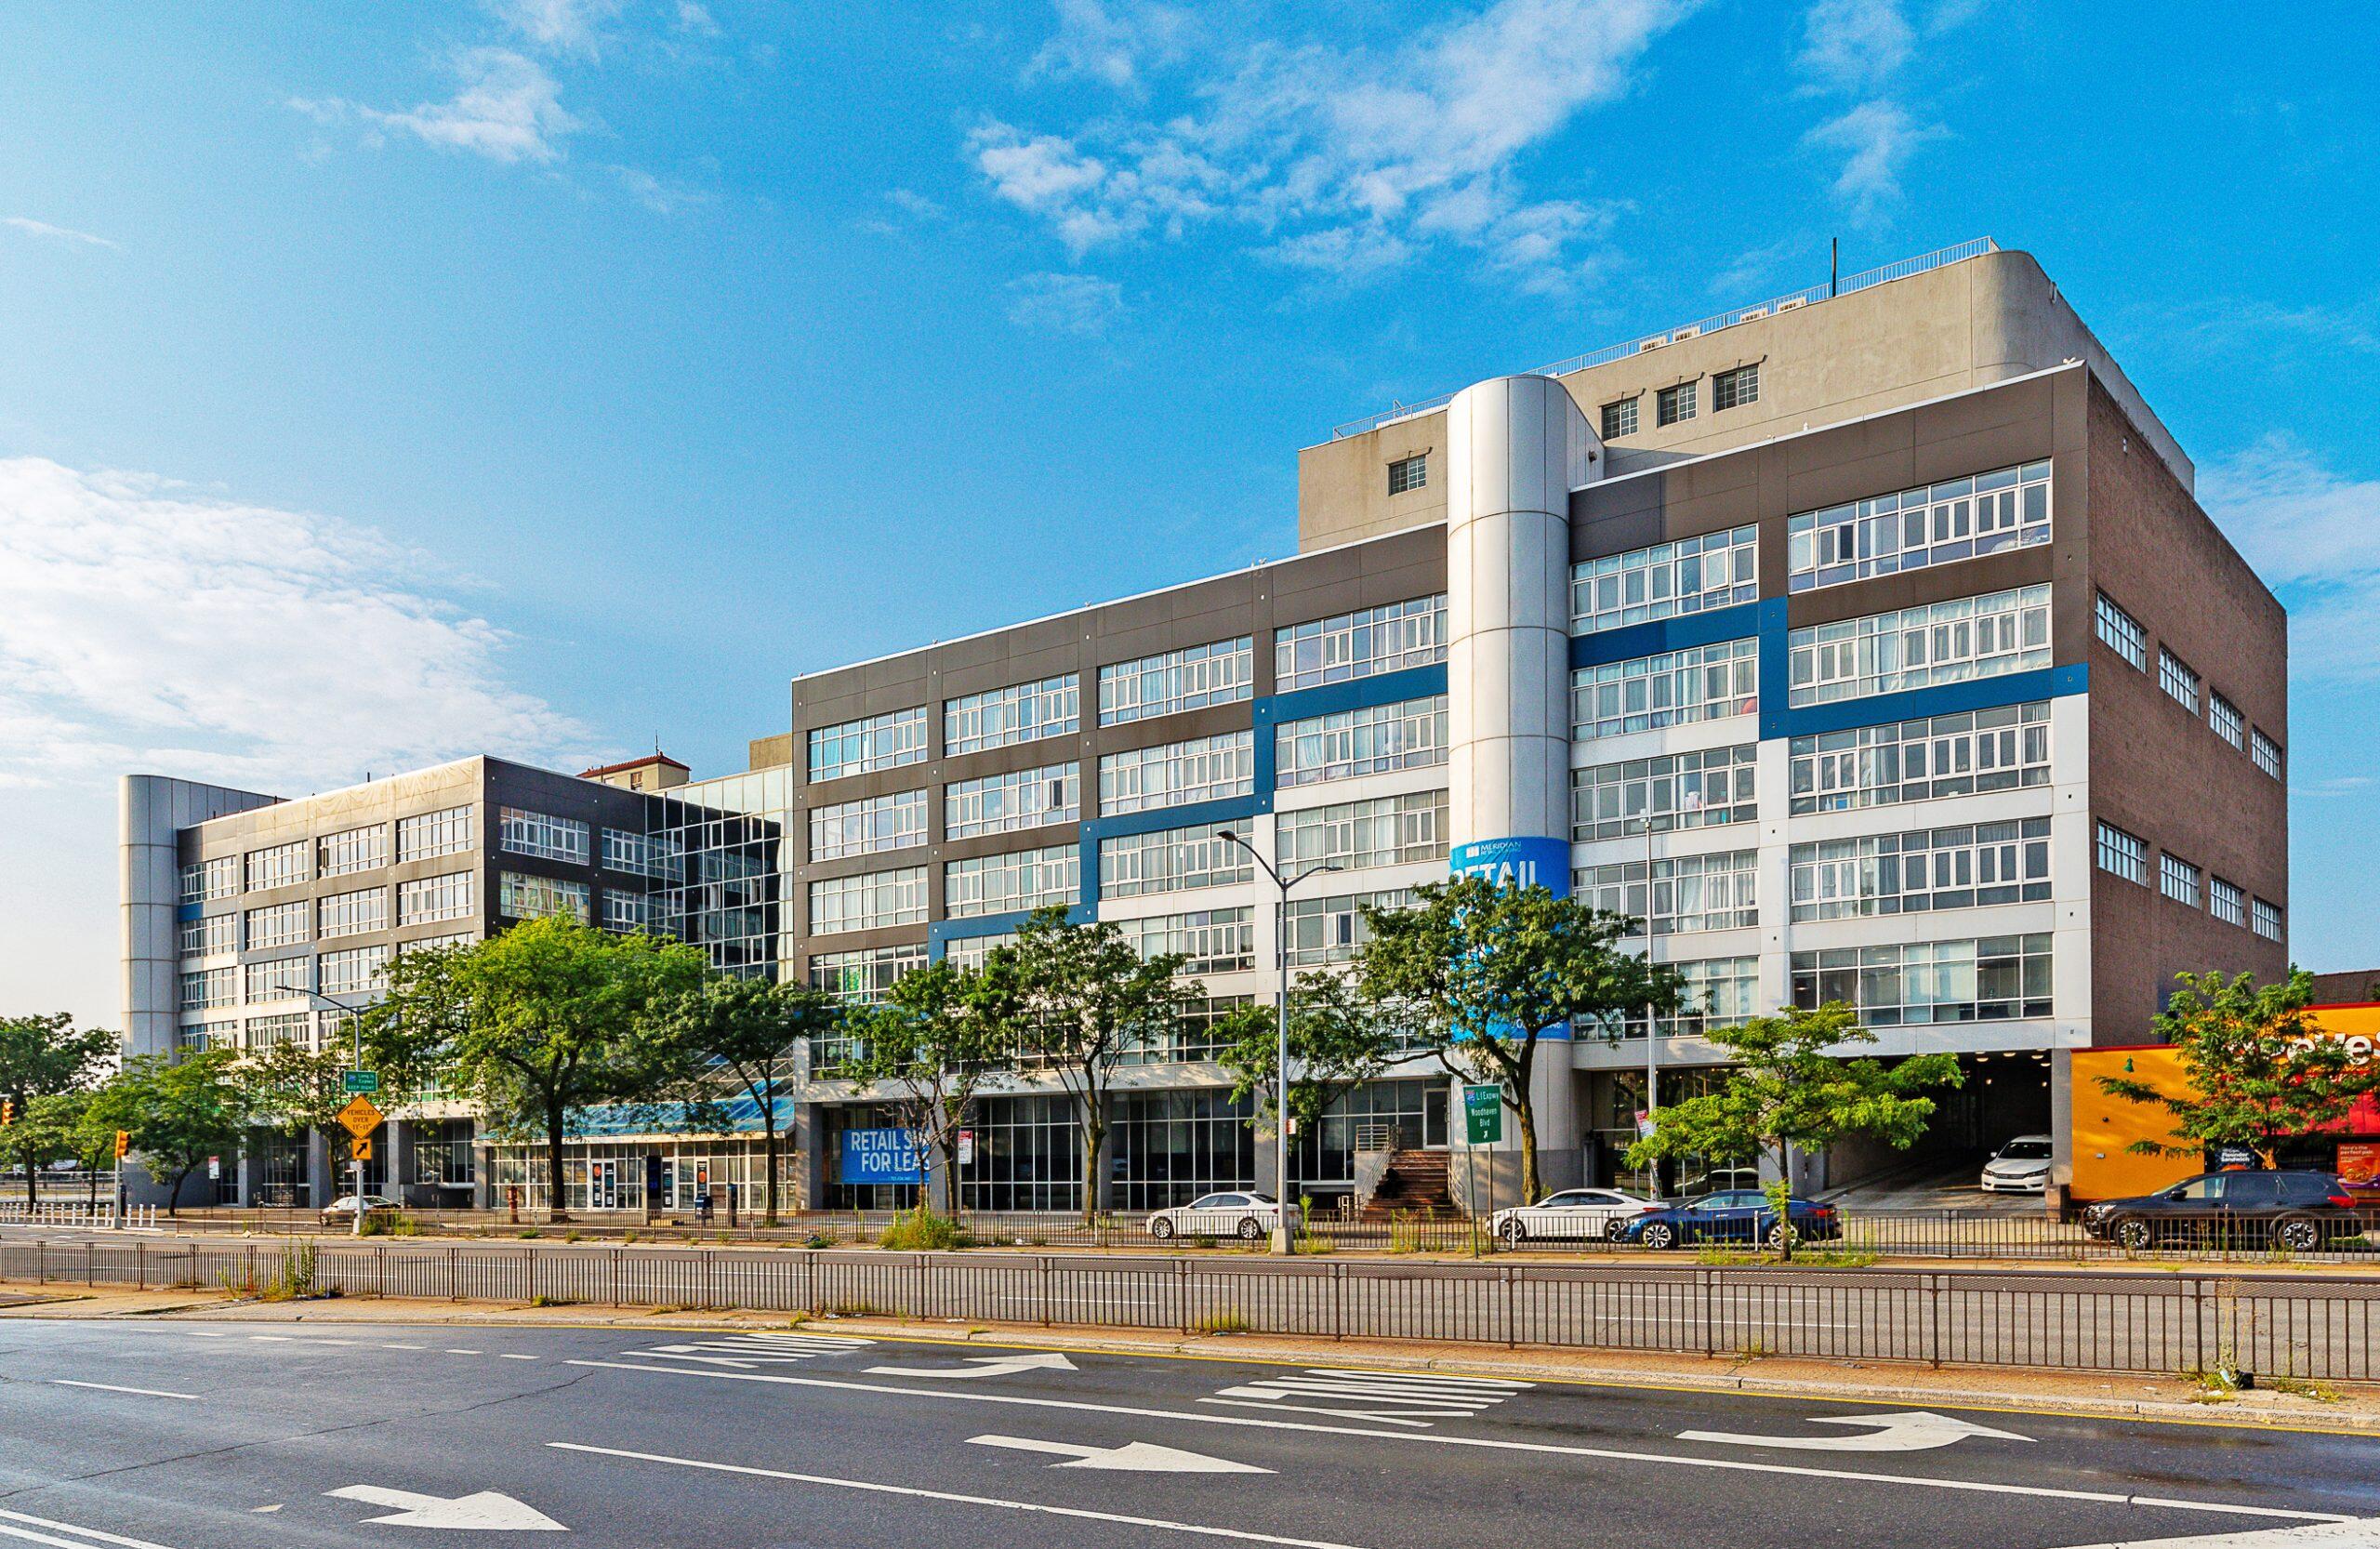 Meridian Capital’s New York Institutional Investment Sales Team and Rosewood Realty Group Hired to Sell Amenitized Workforce Housing Building in Elmhurst, Queens